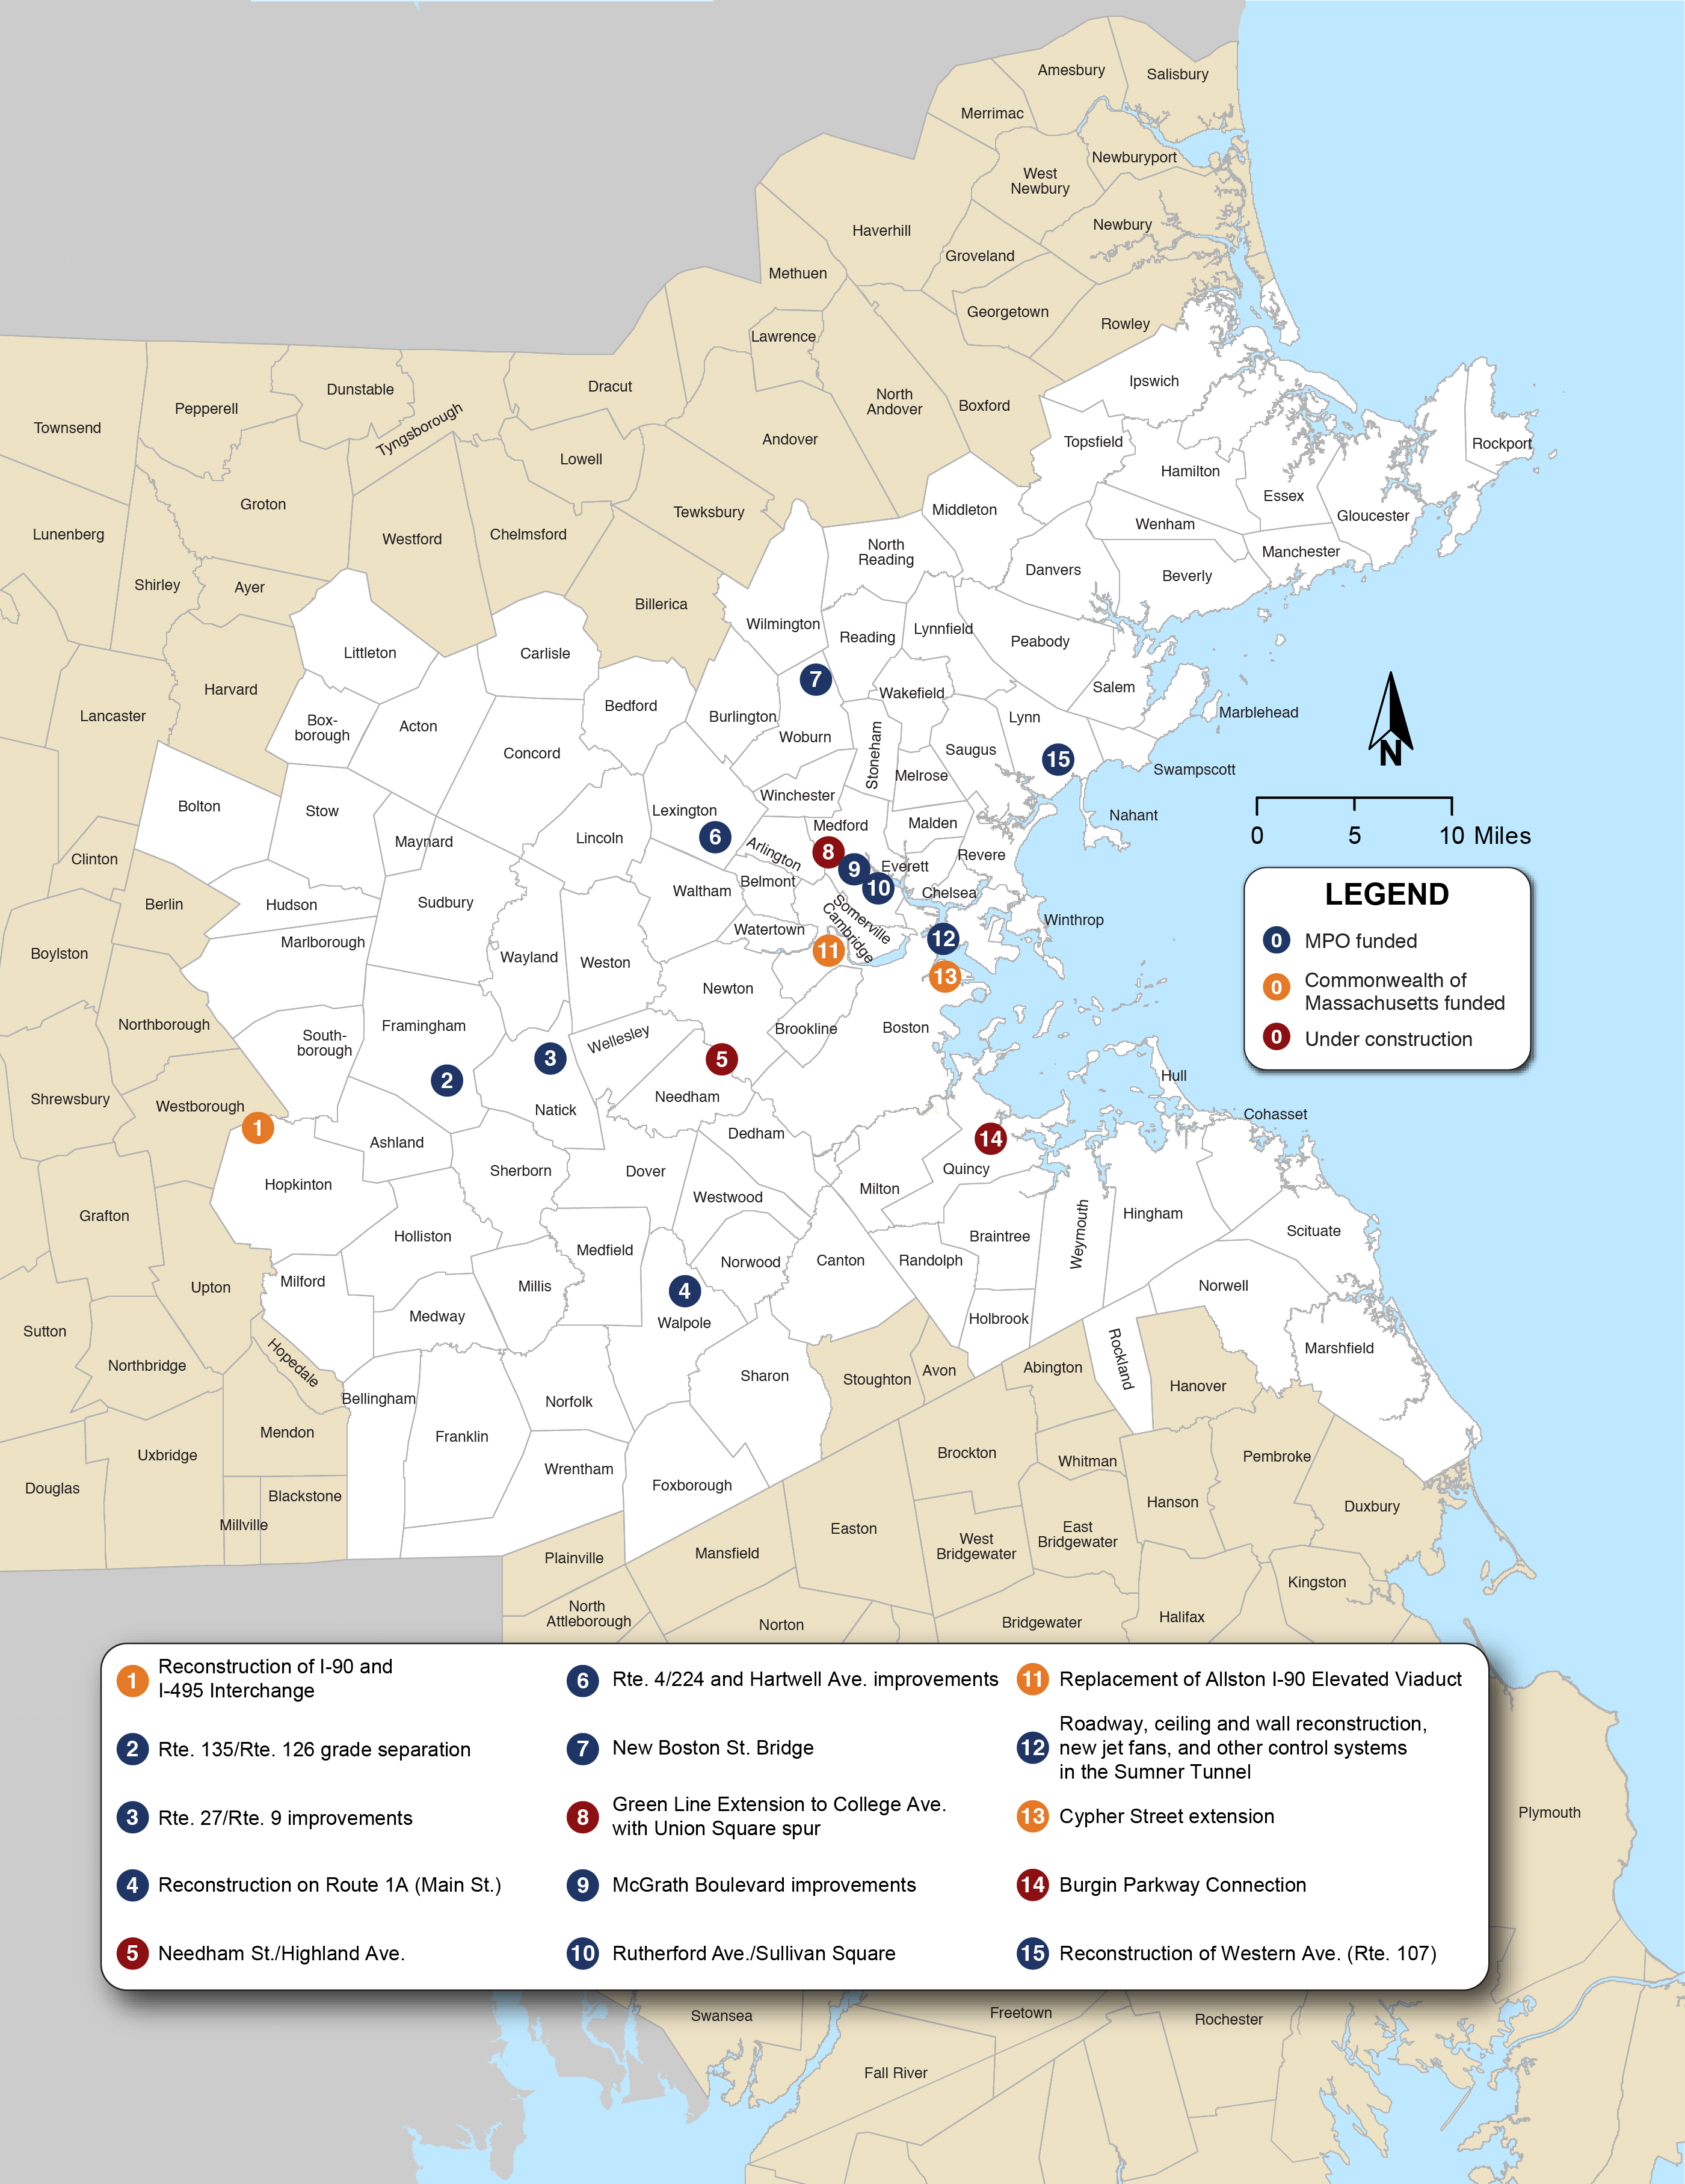 Figure 4-1. Major Infrastructure Projects in the Recommended Plan
Figure 4-1 is a map of the Boston Region that shows the location and name of 15 major infrastructure projects. Figure 4-1 also shows whether the project is MPO funded, Commonwealth of Massachusetts funded, or a No-build project. 
